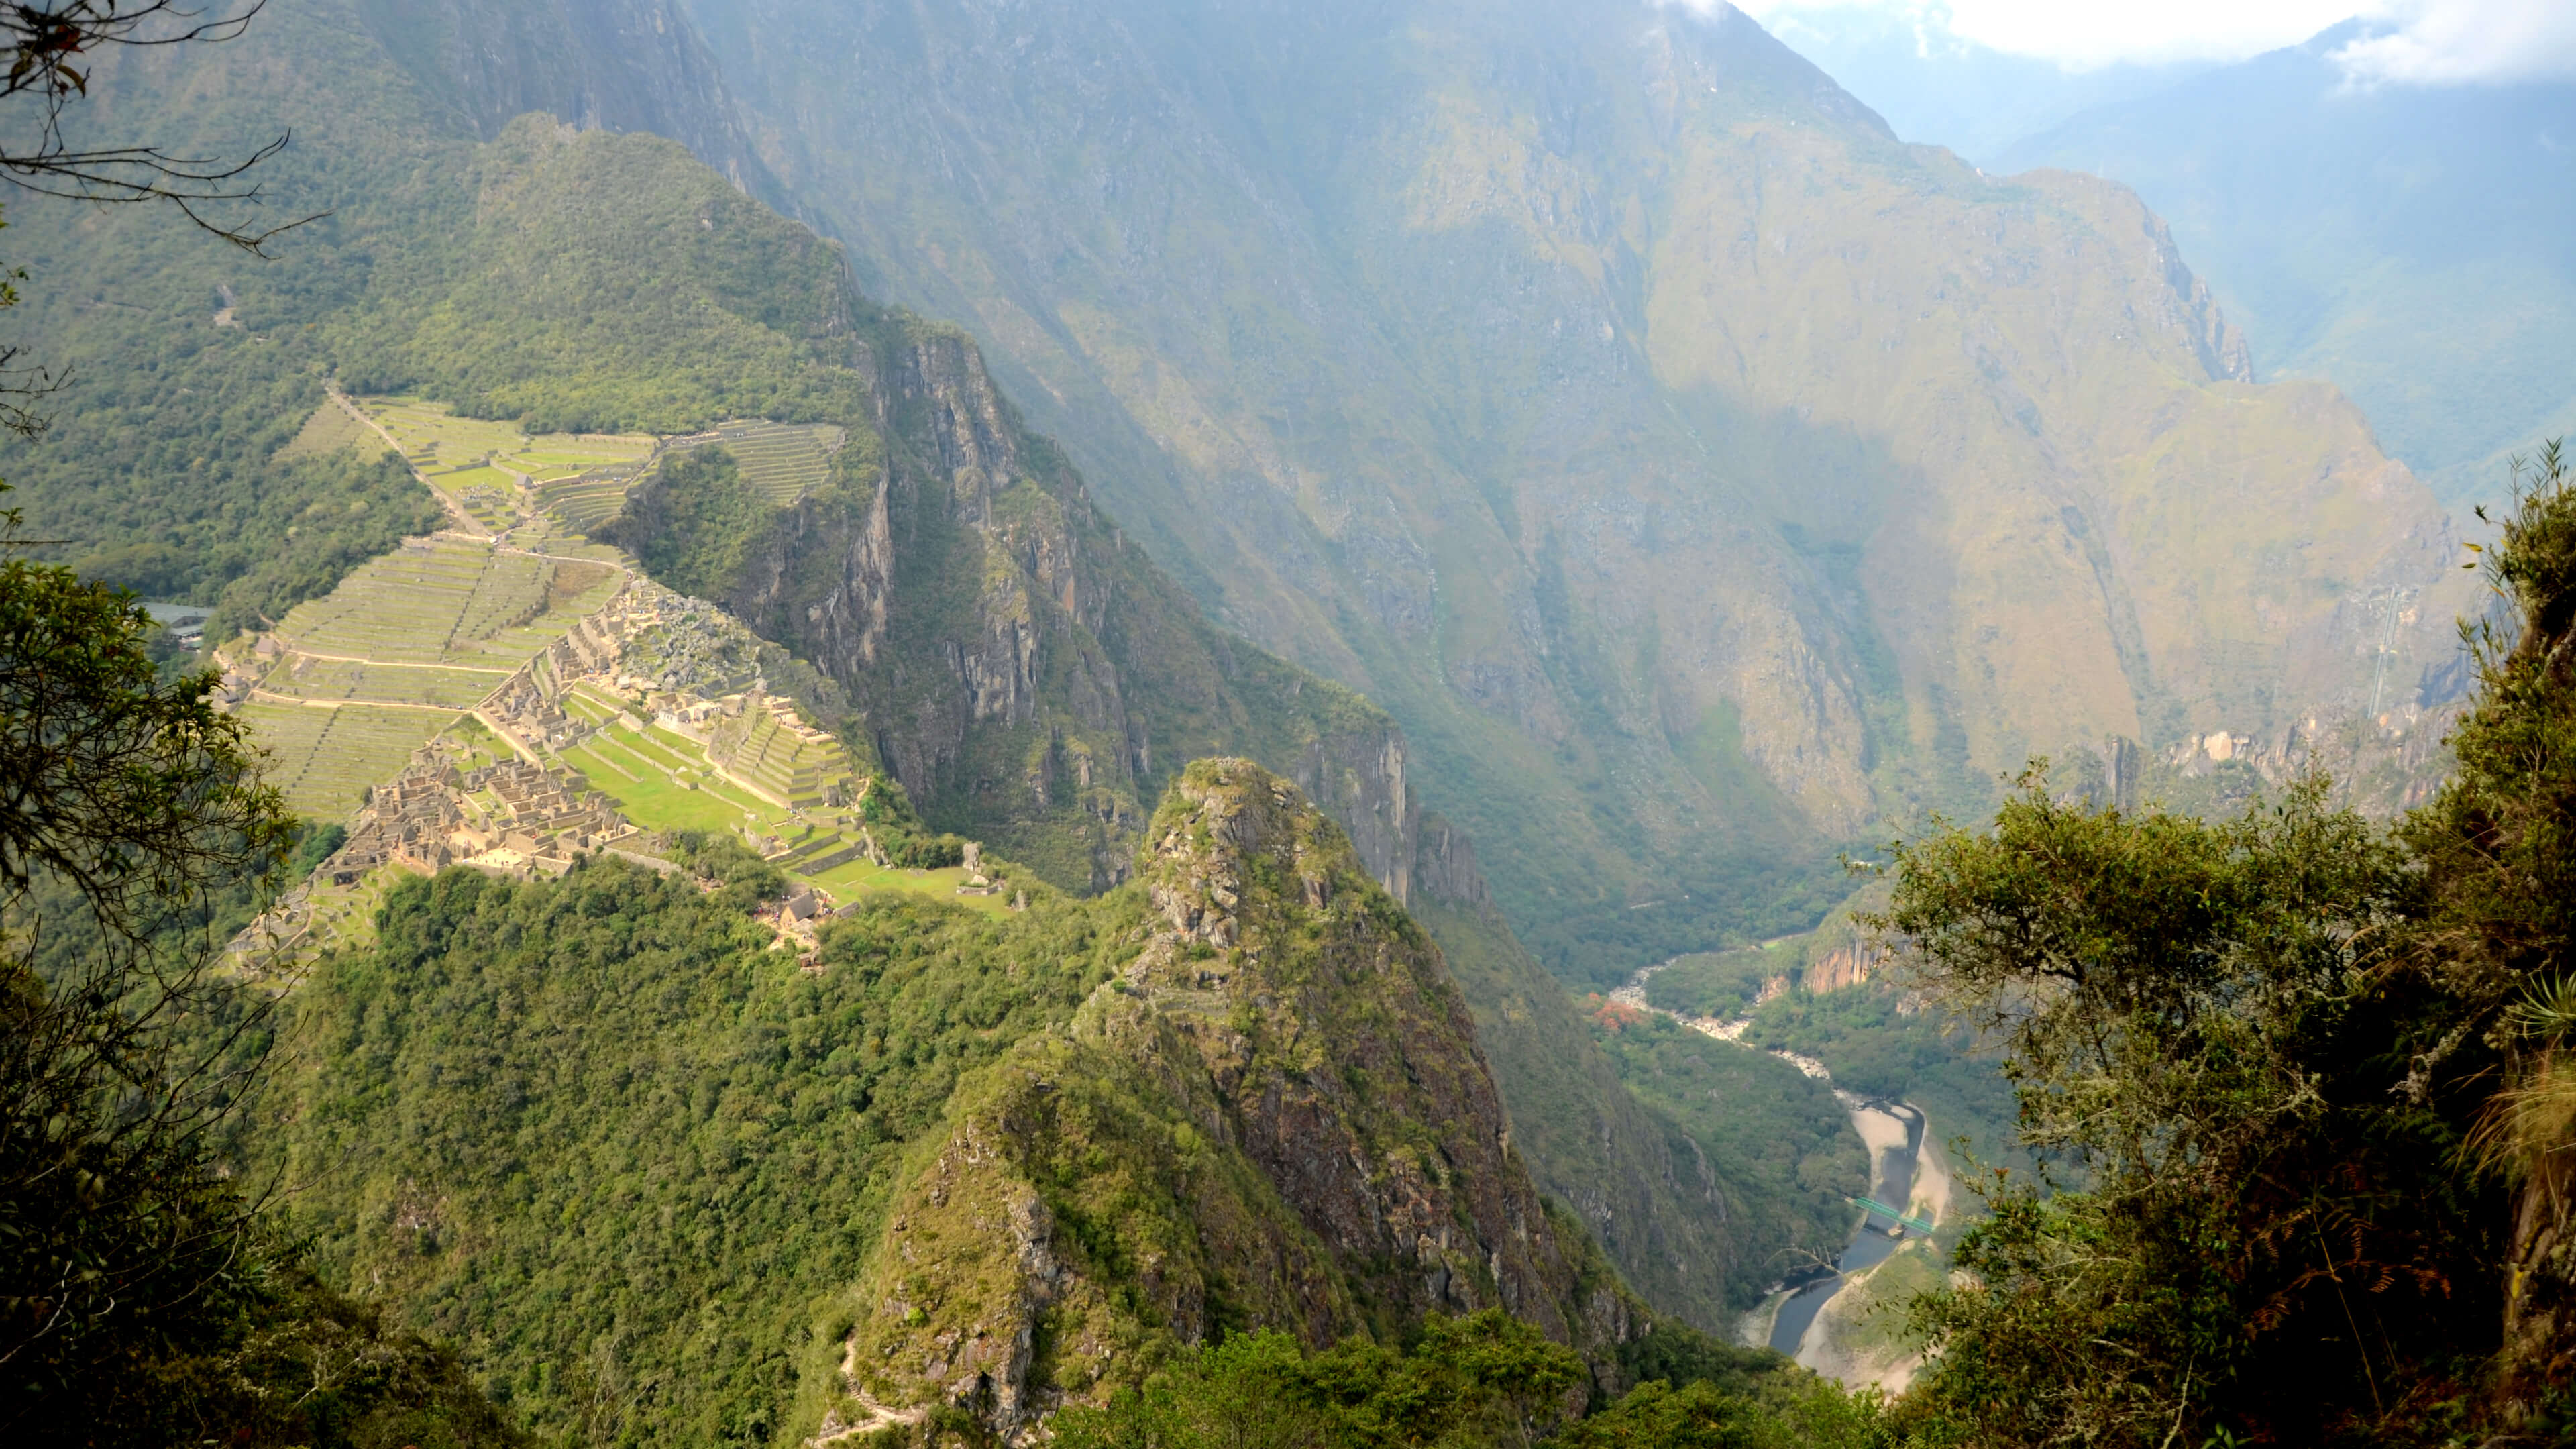 View of Machu Picchu and Urubamba valley from the top of Huayna Picchu